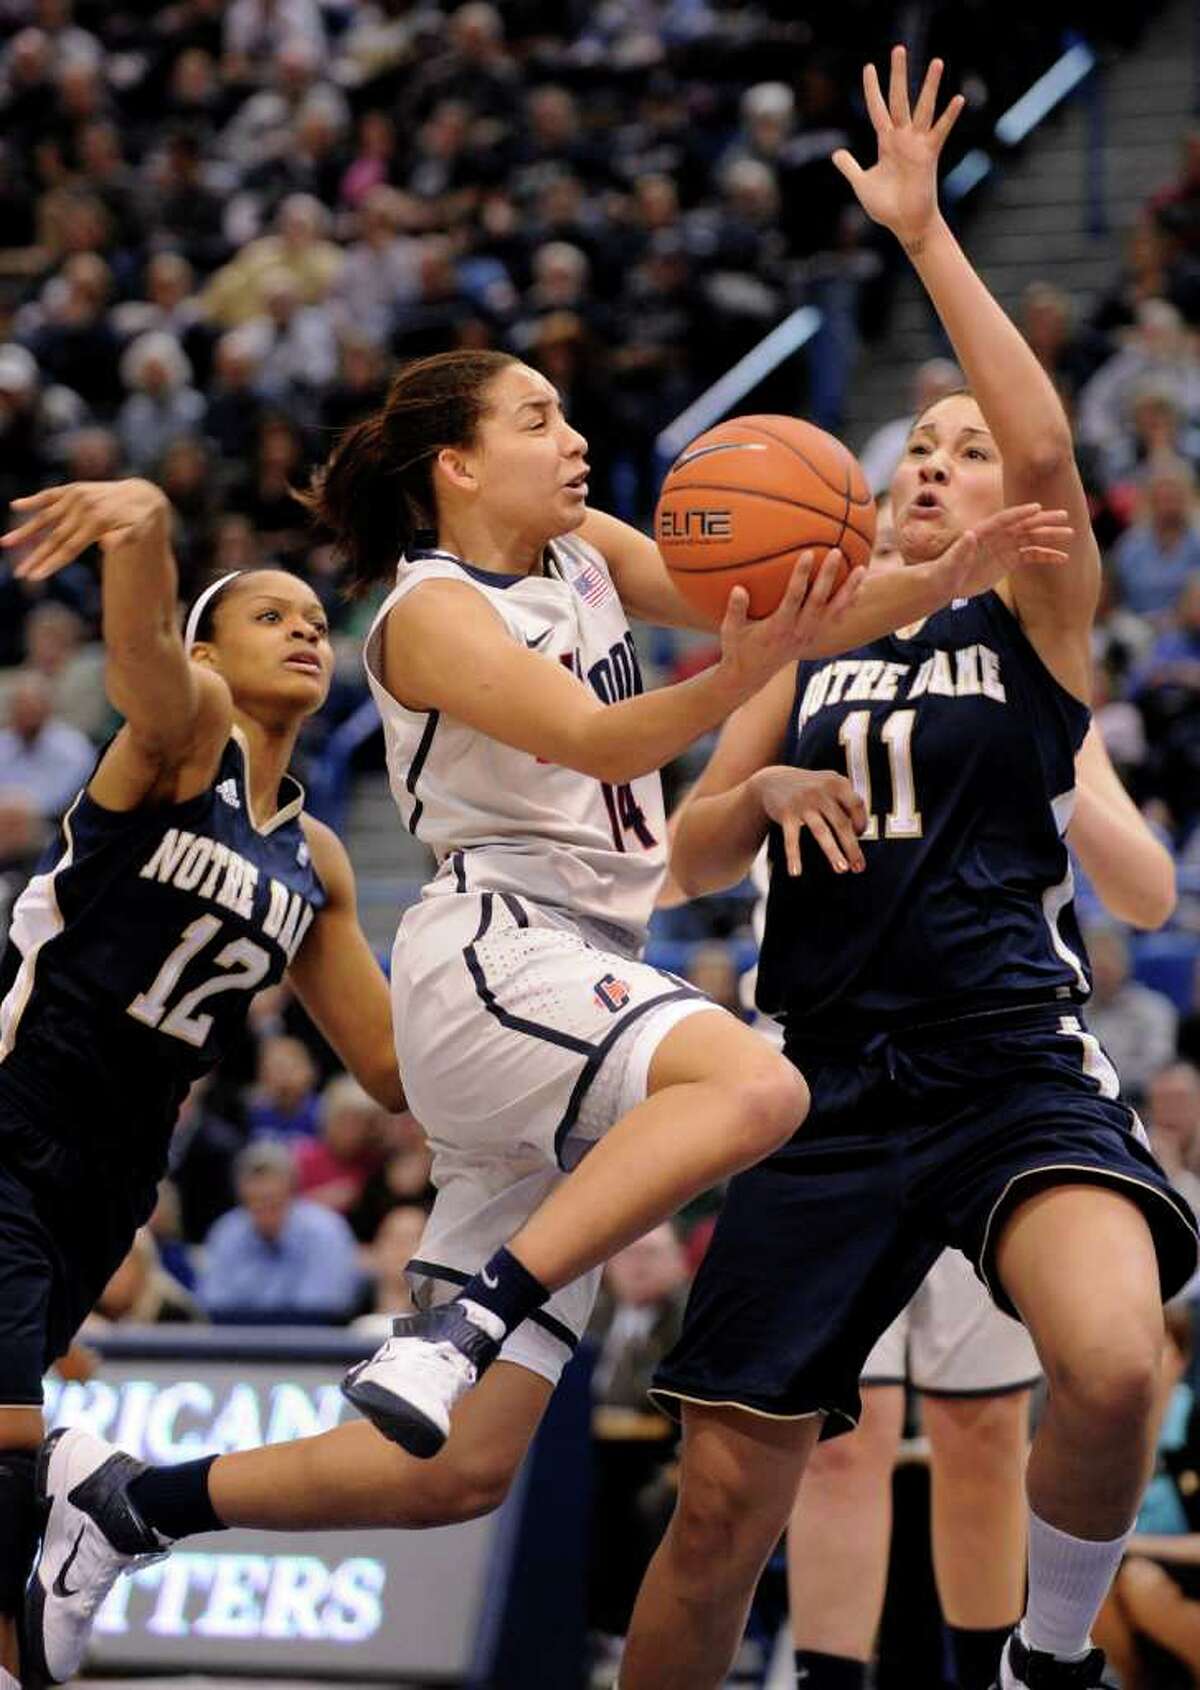 Connecticut's Bria Hartley, center, drives past Notre Dame's Frederica Miller, left, and Natalie Achonwa during the first half an NCAA college basketball game in the final of the Big East tournament in Hartford, Conn., on Tuesday, March 8, 2011. (AP Photo/Fred Beckham)